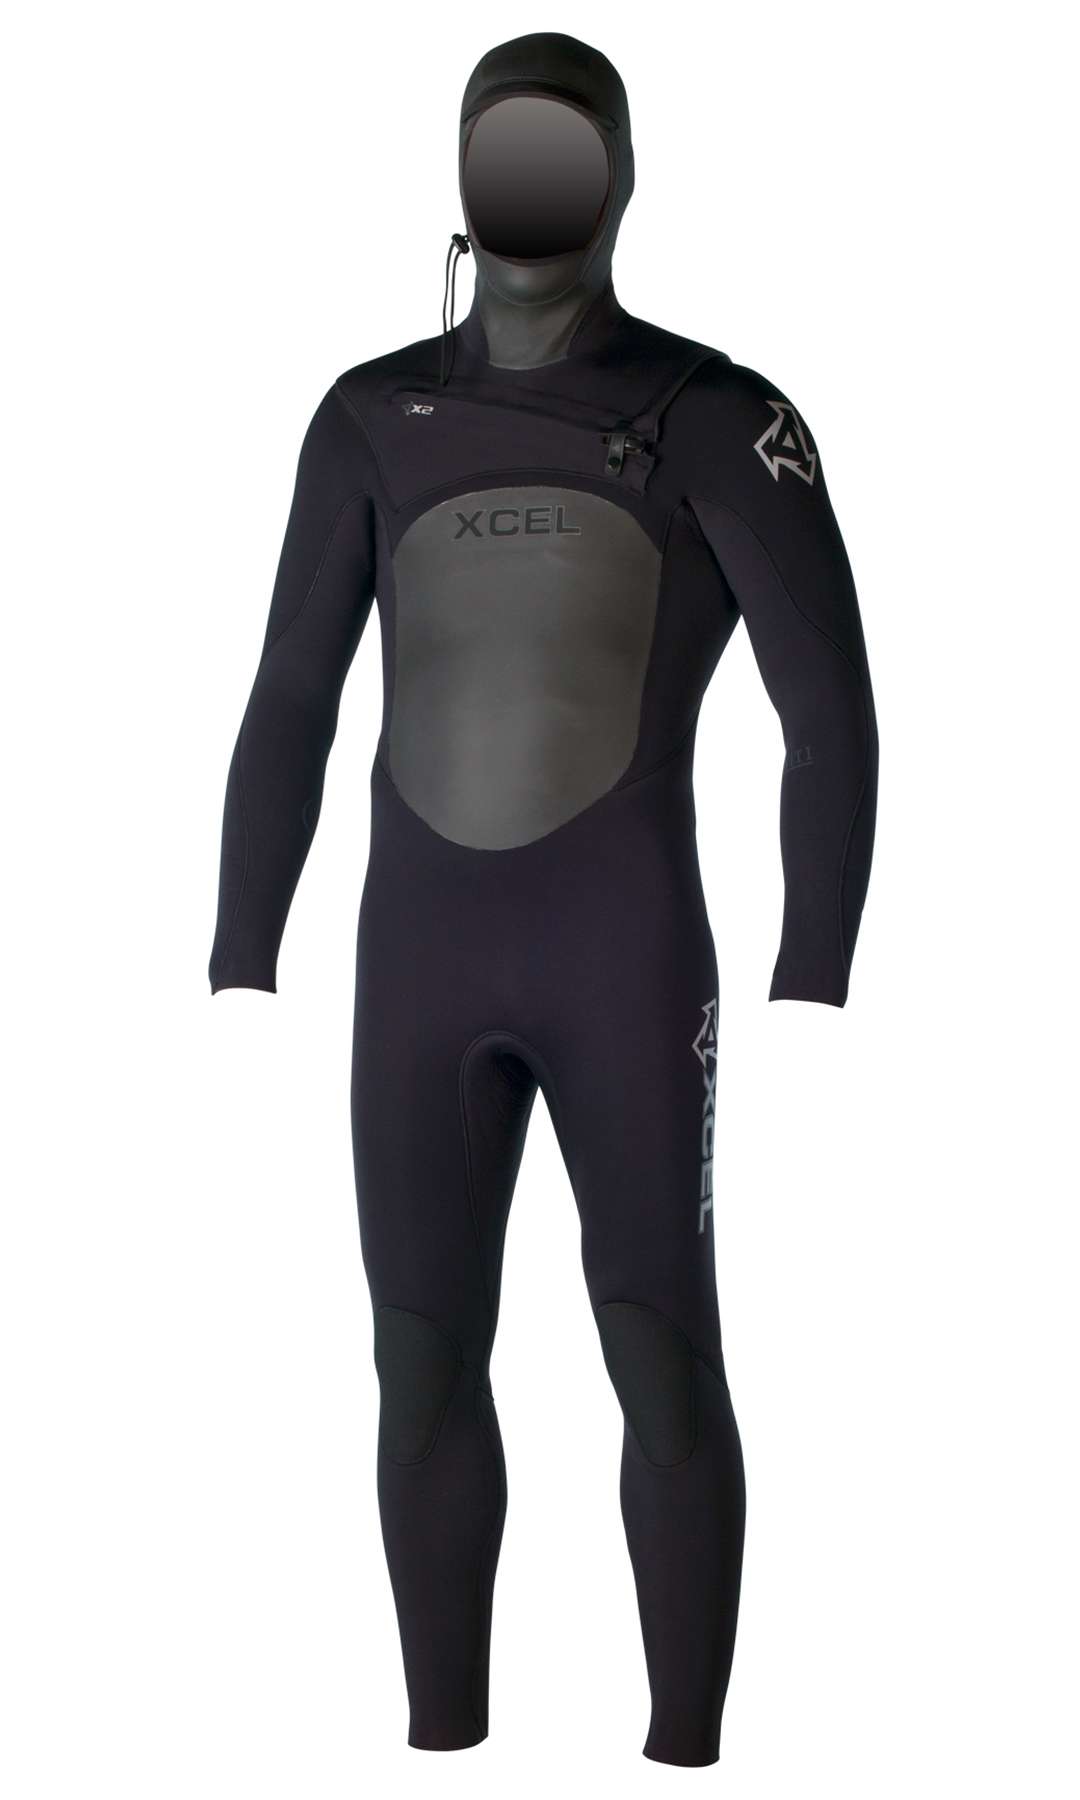 Xcel Infiniti X2 5/4/3mm Hooded Wetsuit 2015 | King of Watersports